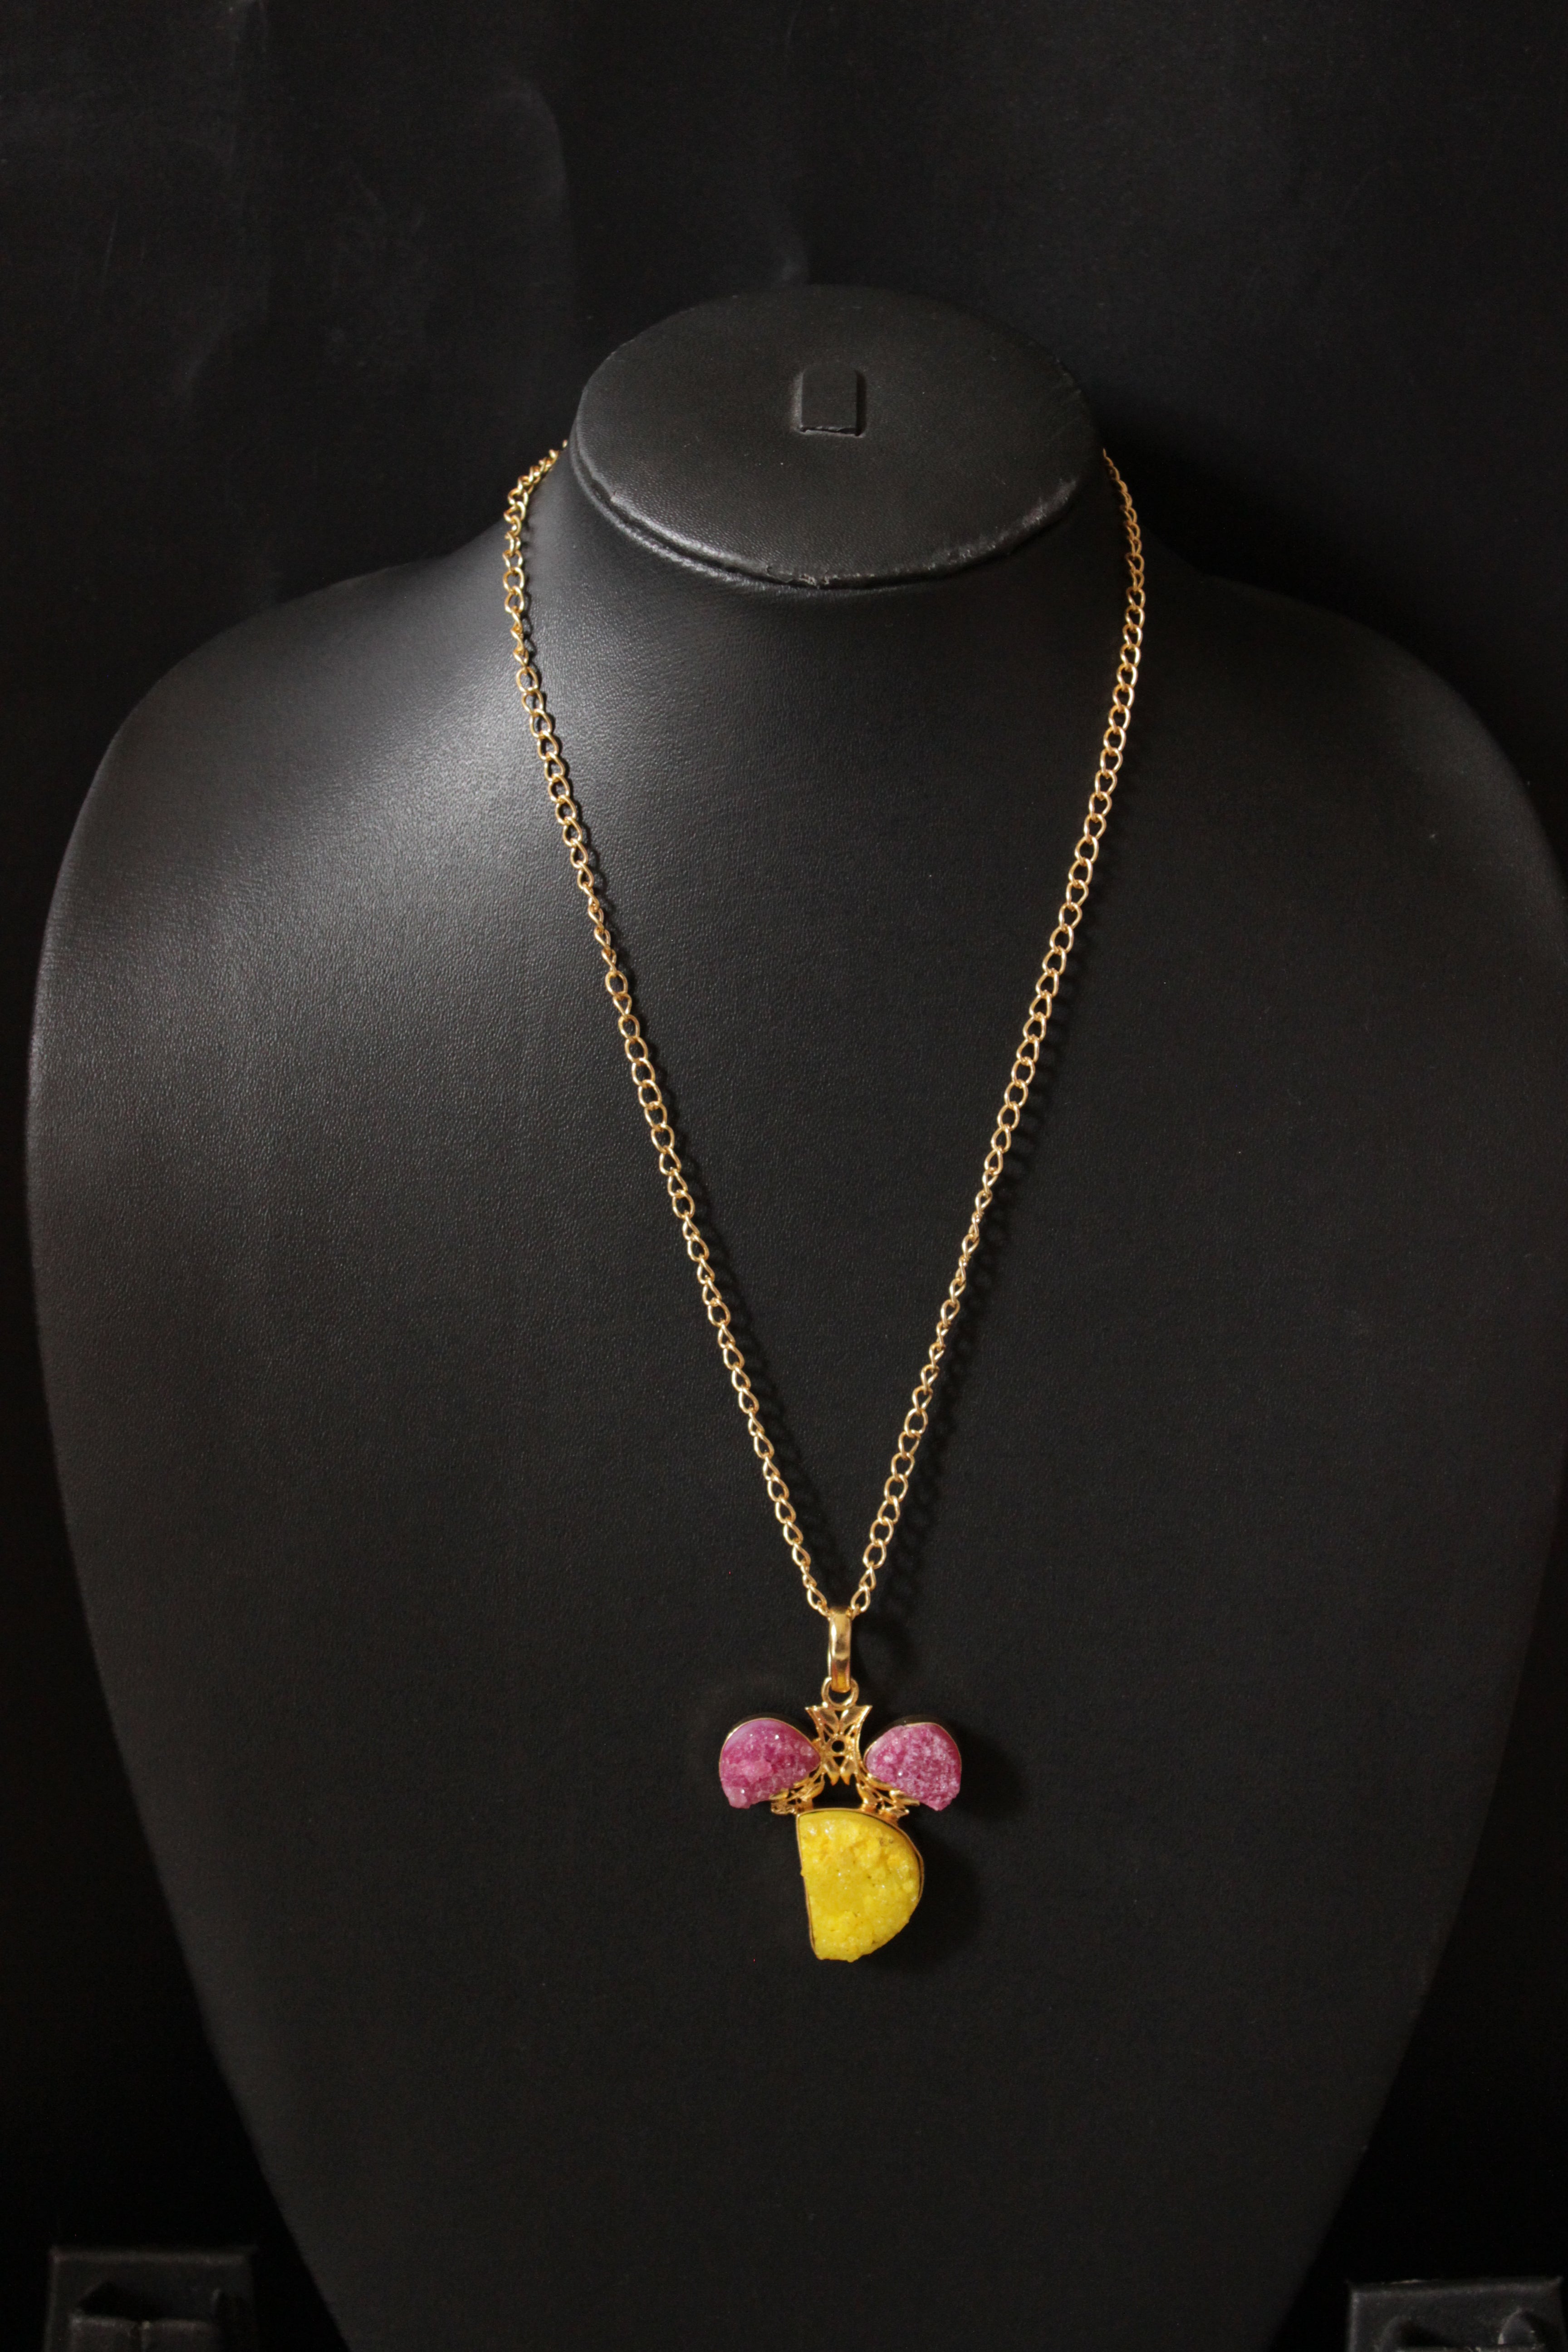 Bright Yellow and Pink Sugar Druzy Gemstone Embedded Gold Plated Handmade Necklace